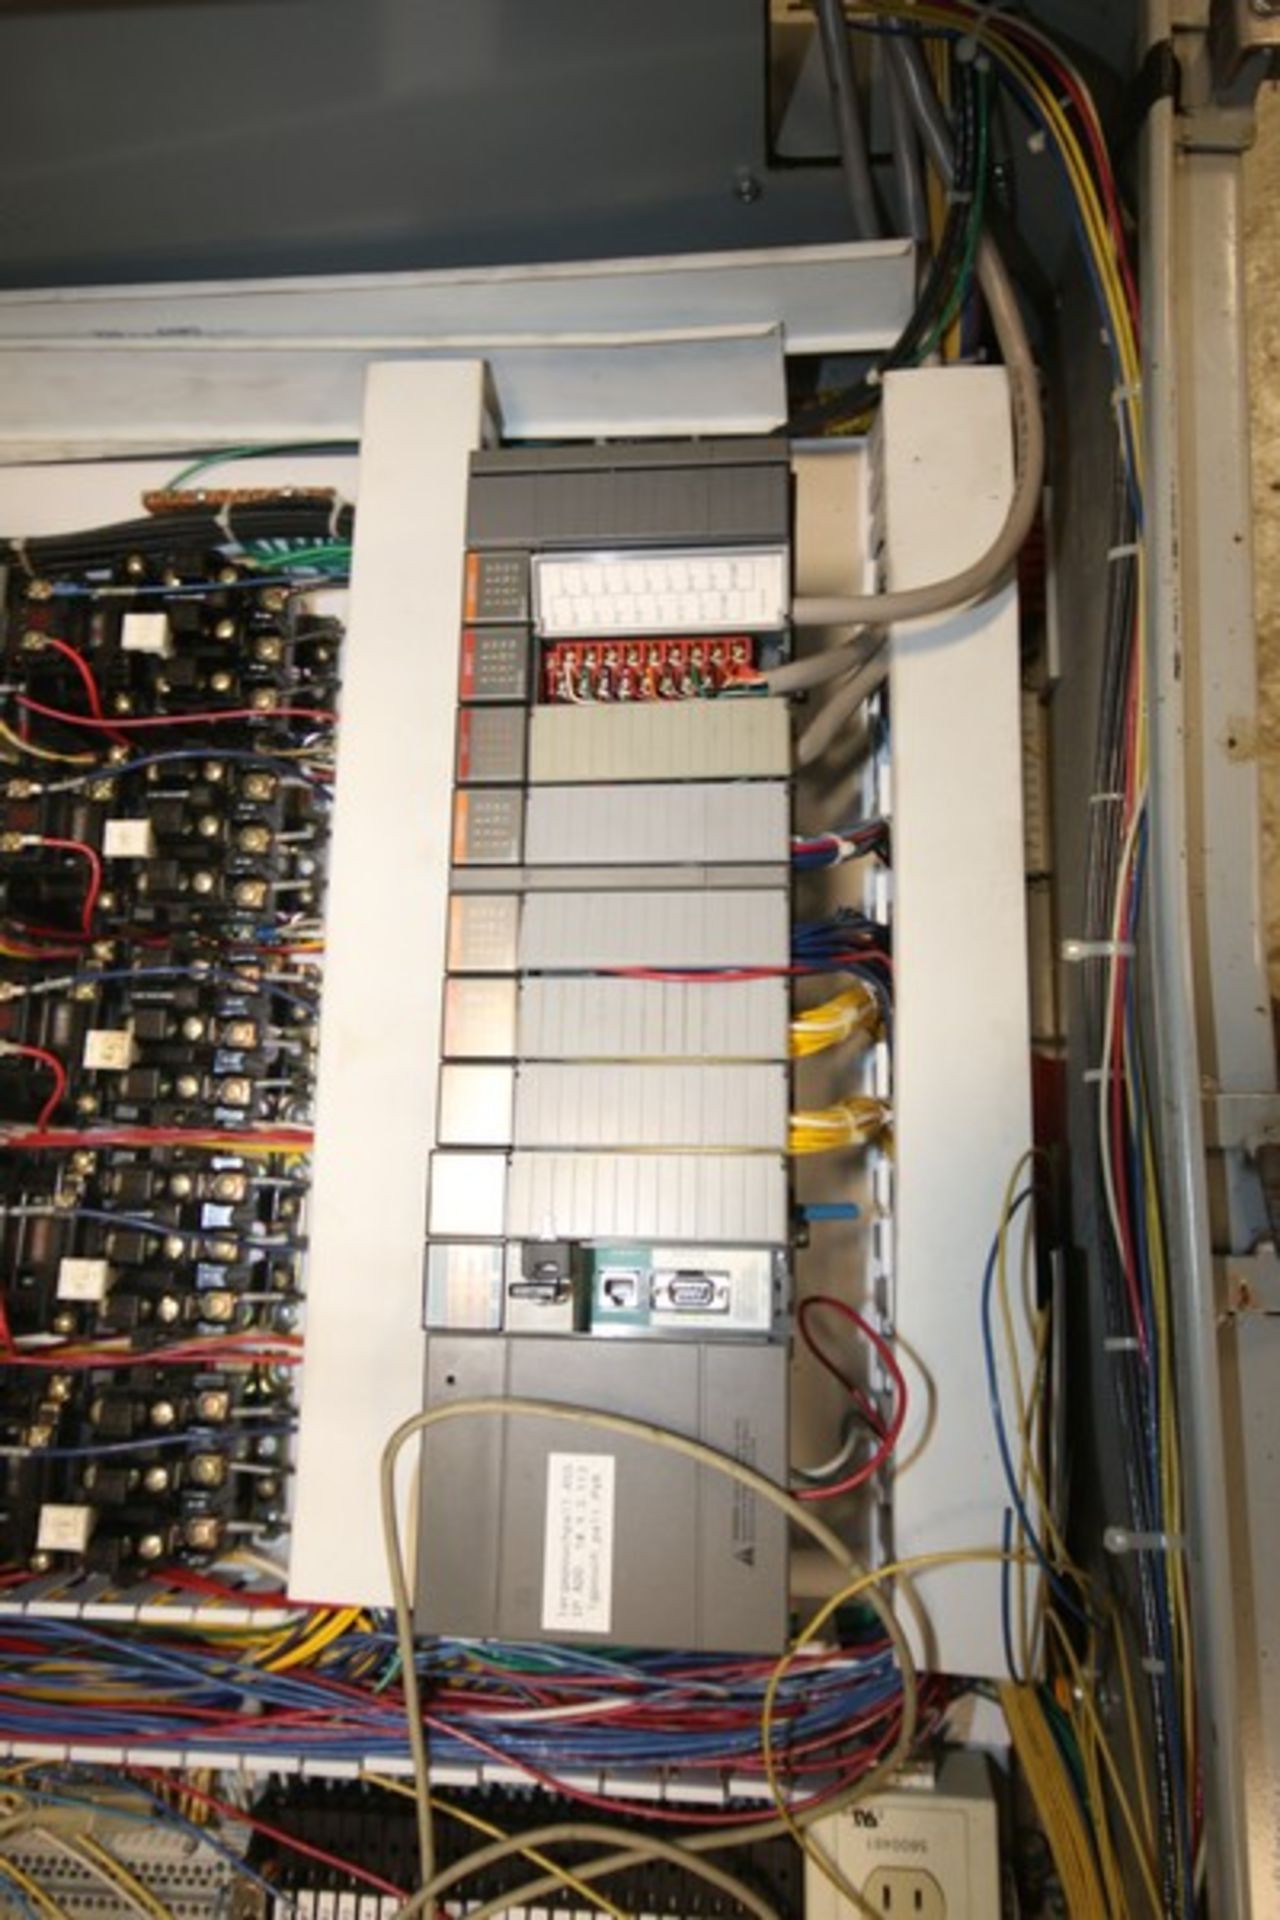 Hubbell 4' H x 3' W x 12" D Production Control Panel with Allen Bradley 10- Slot PLC Controller - Image 2 of 5